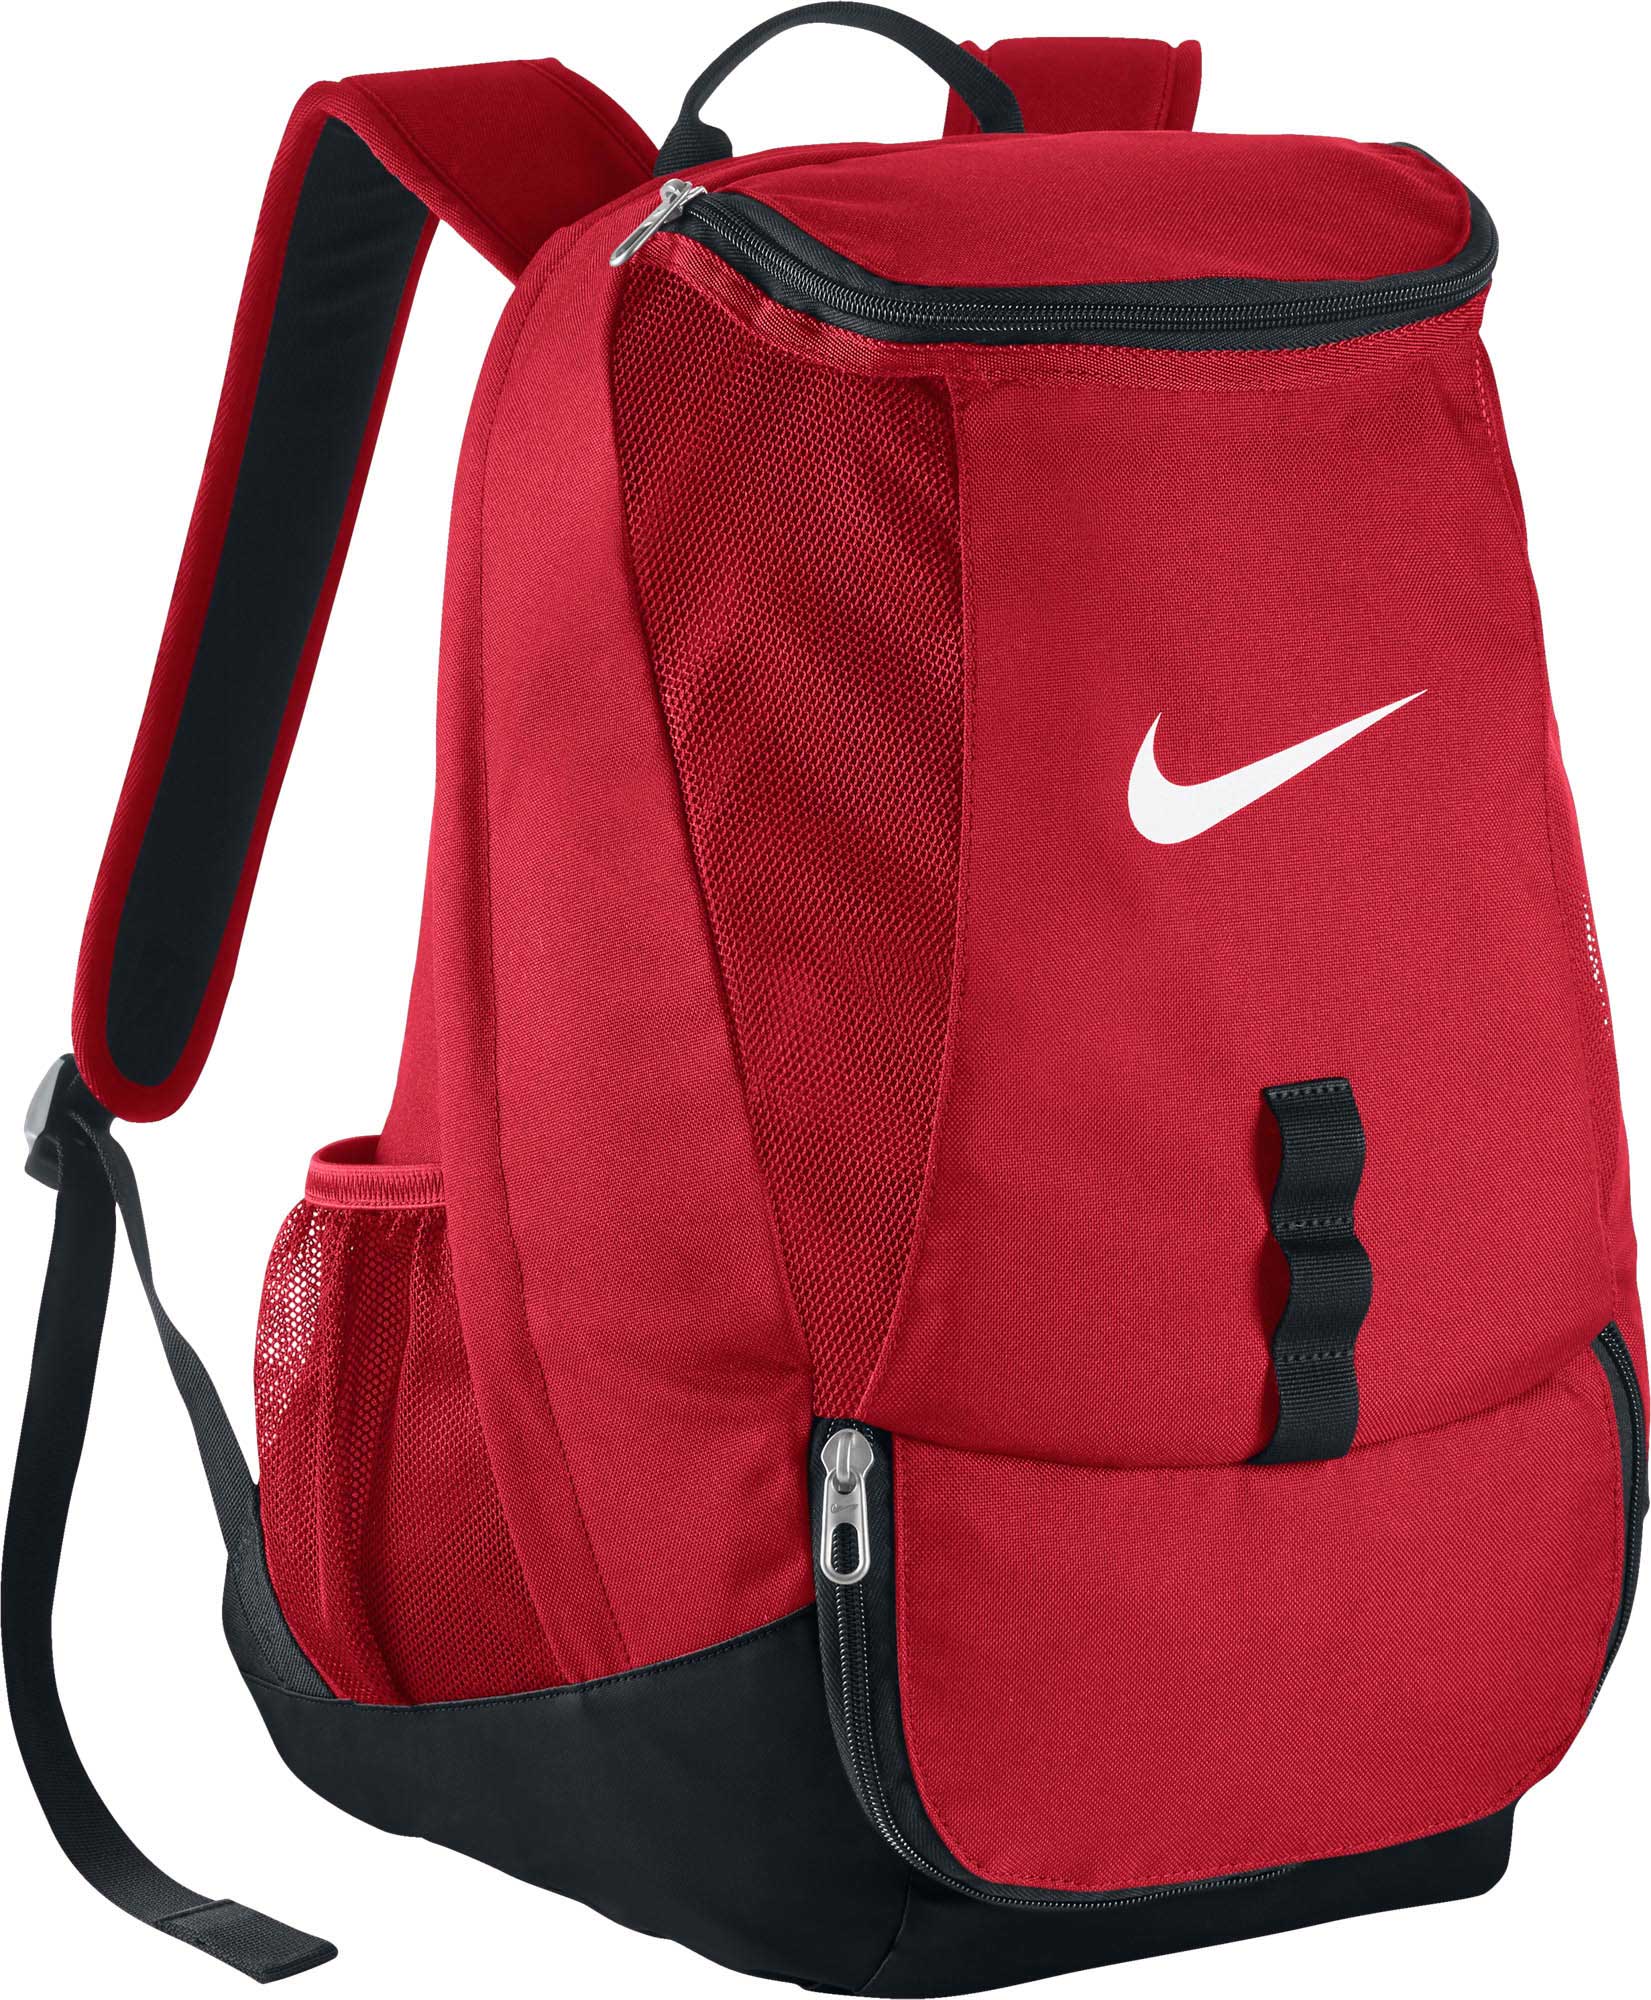 nike soccer backpack with ball compartment